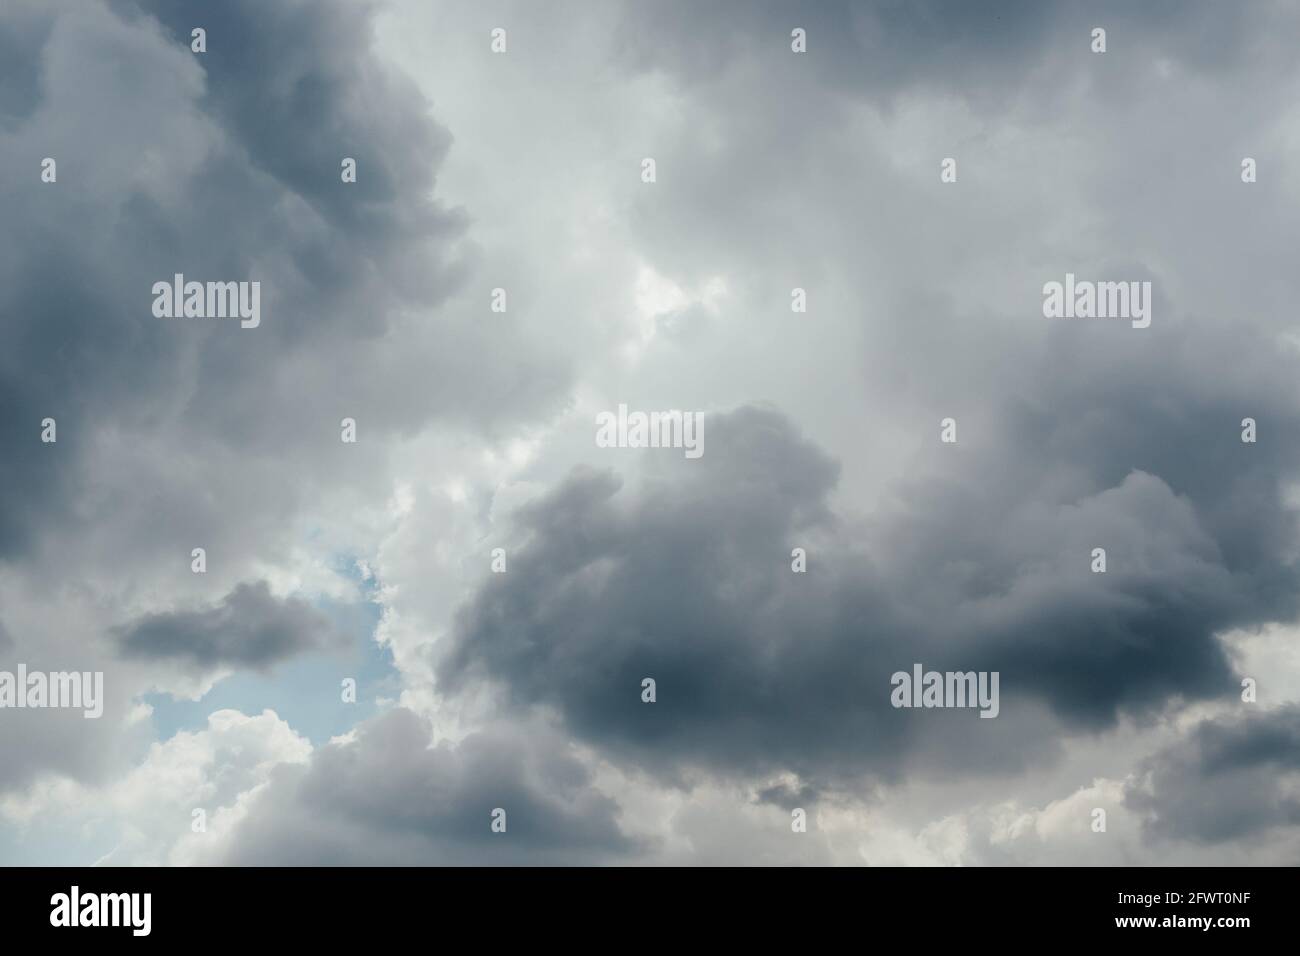 Storm clouds, stormy grey cloudy sky, dark clouds background Stock Photo